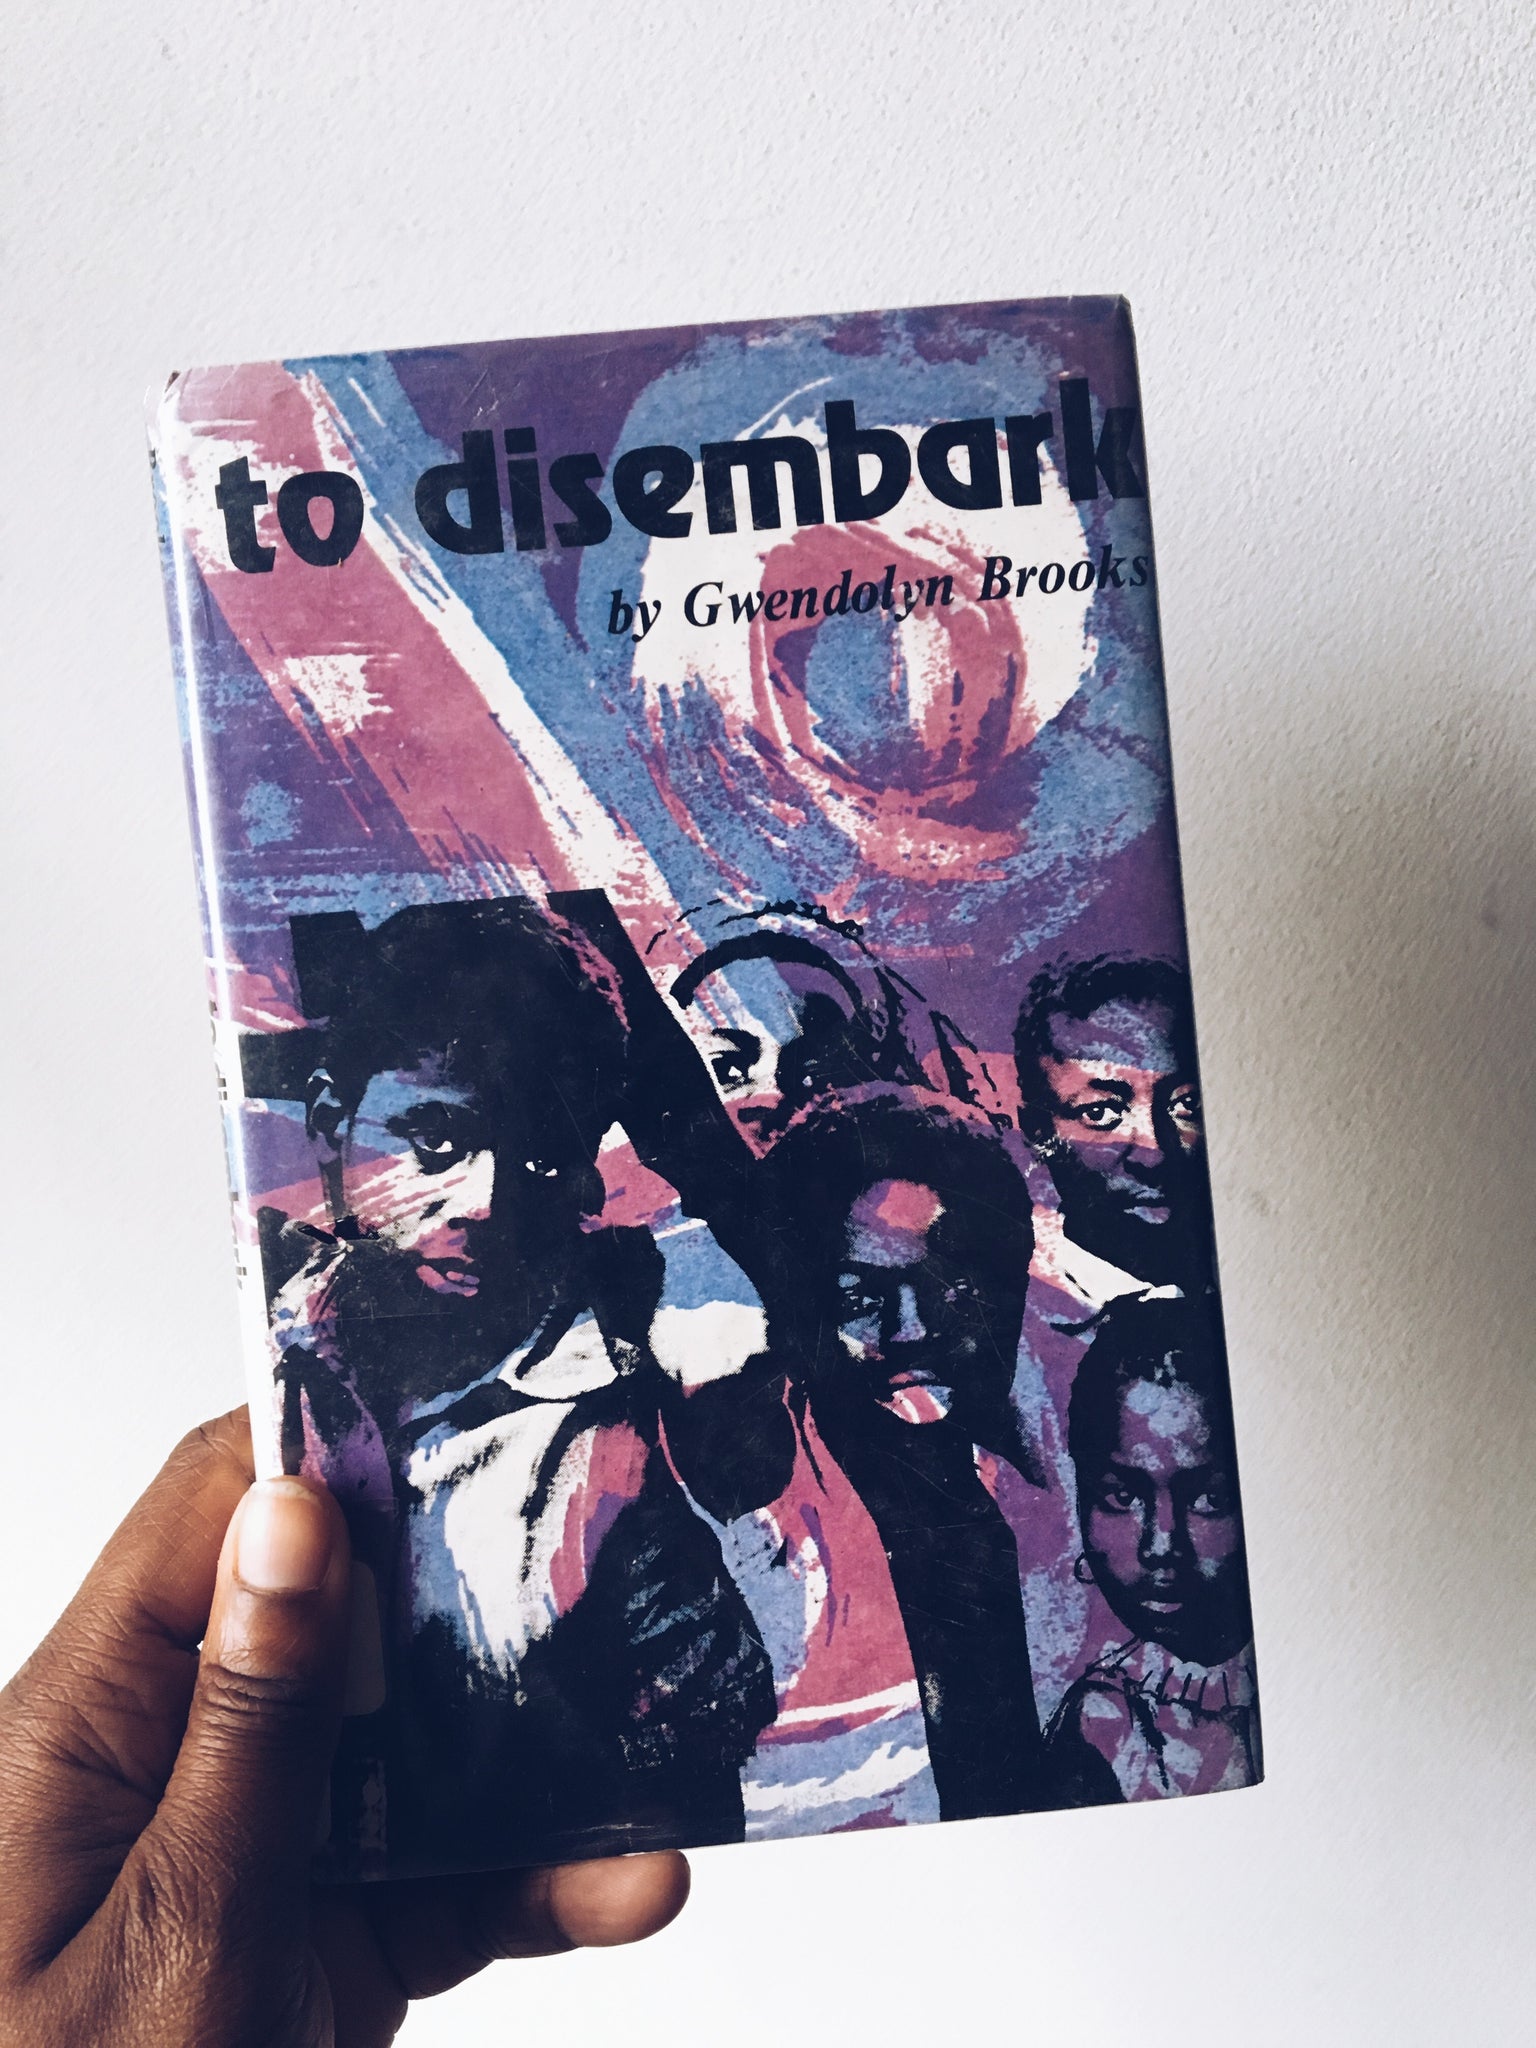 Vintage Softcover "To Disembark" by Gwendolyn Brooks (1981)